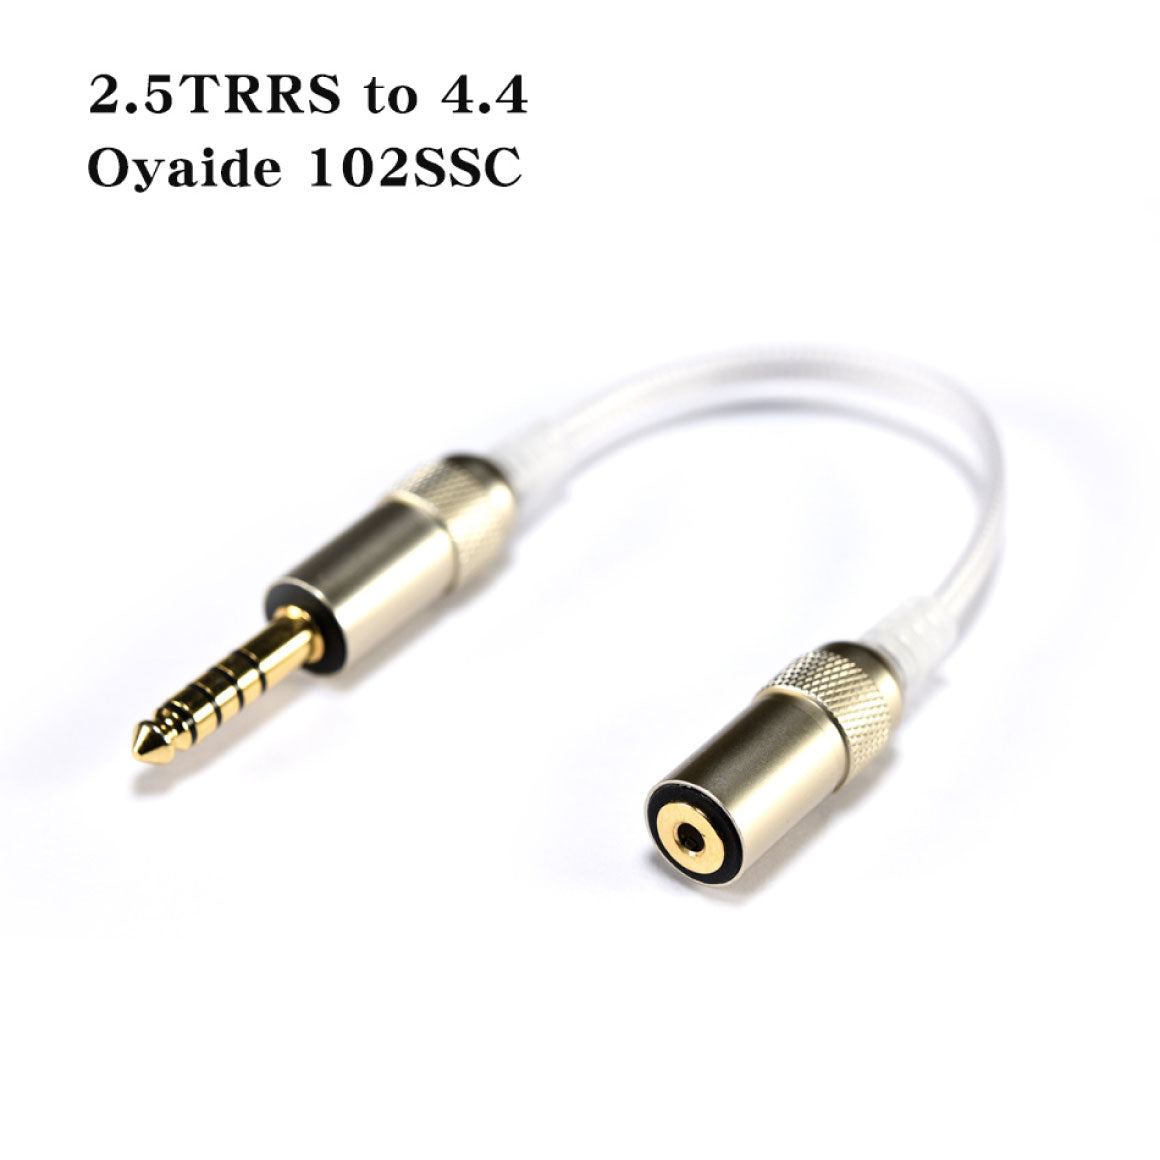 Headphone-Zone-Venture Electronics - Adapter Cables - 2.5mm TRRS Female - 4.4TRRRS